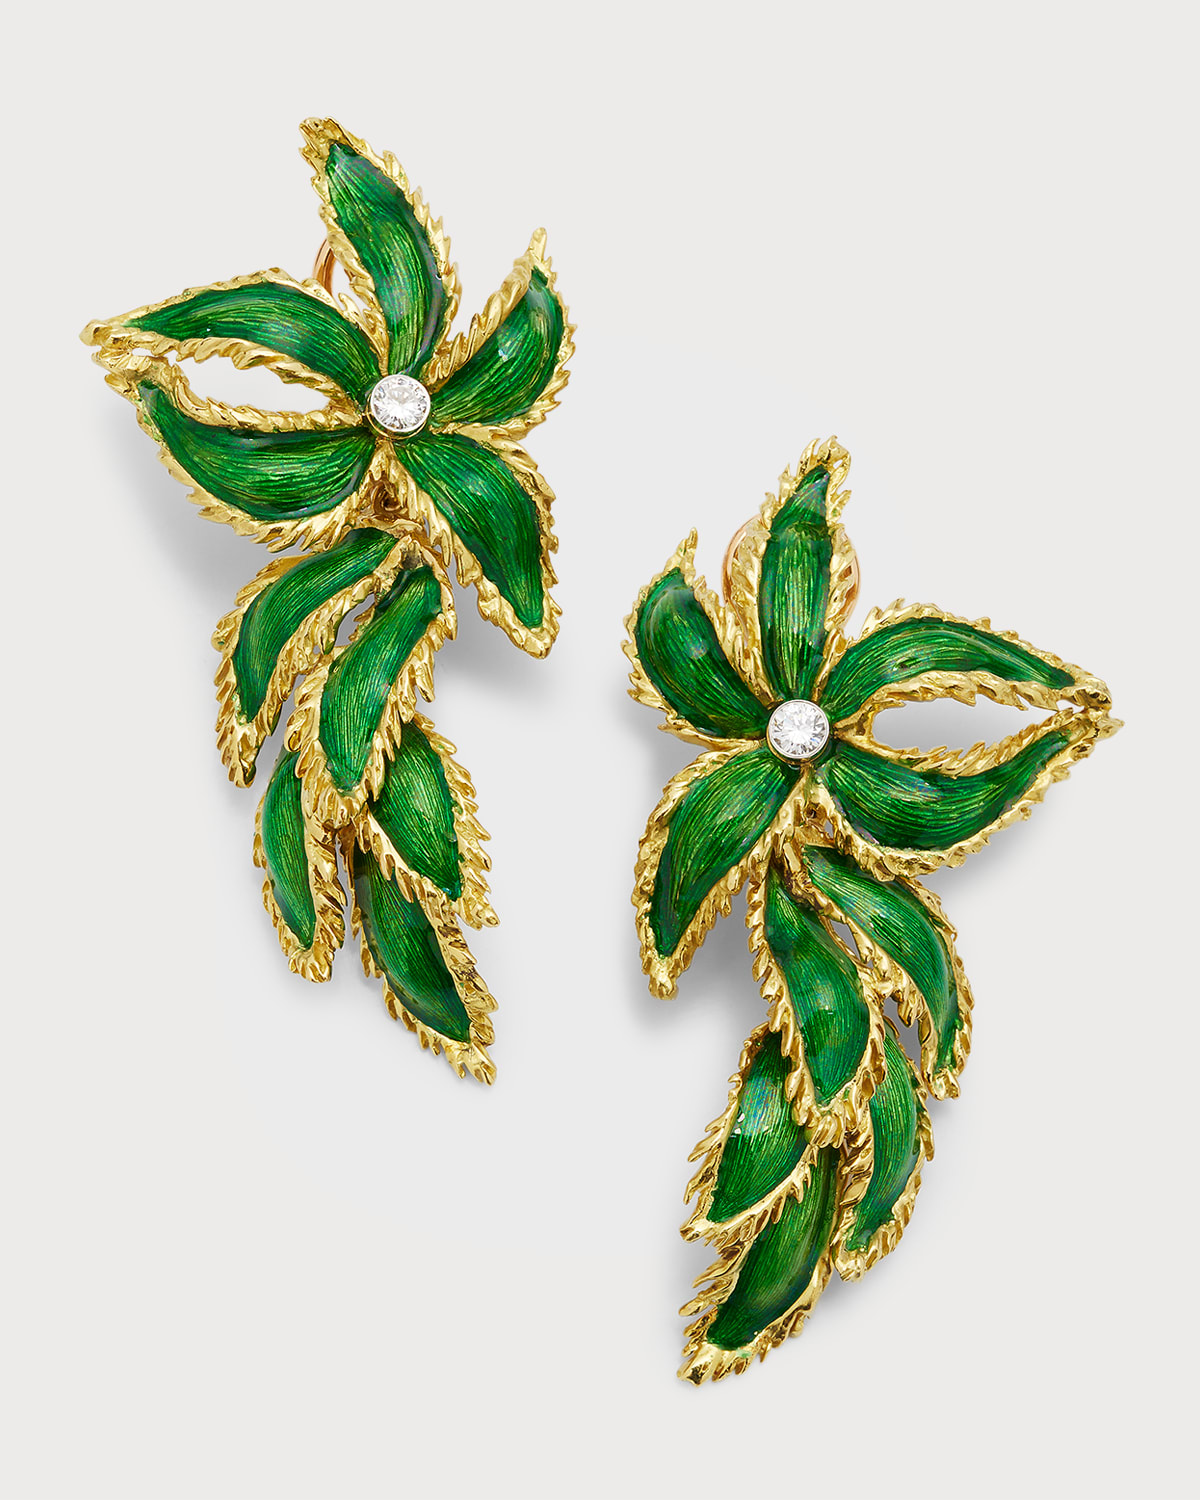 Estate 18K Yellow Gold and Platinum Earrings with Green Enamel Floral Leaf Drop